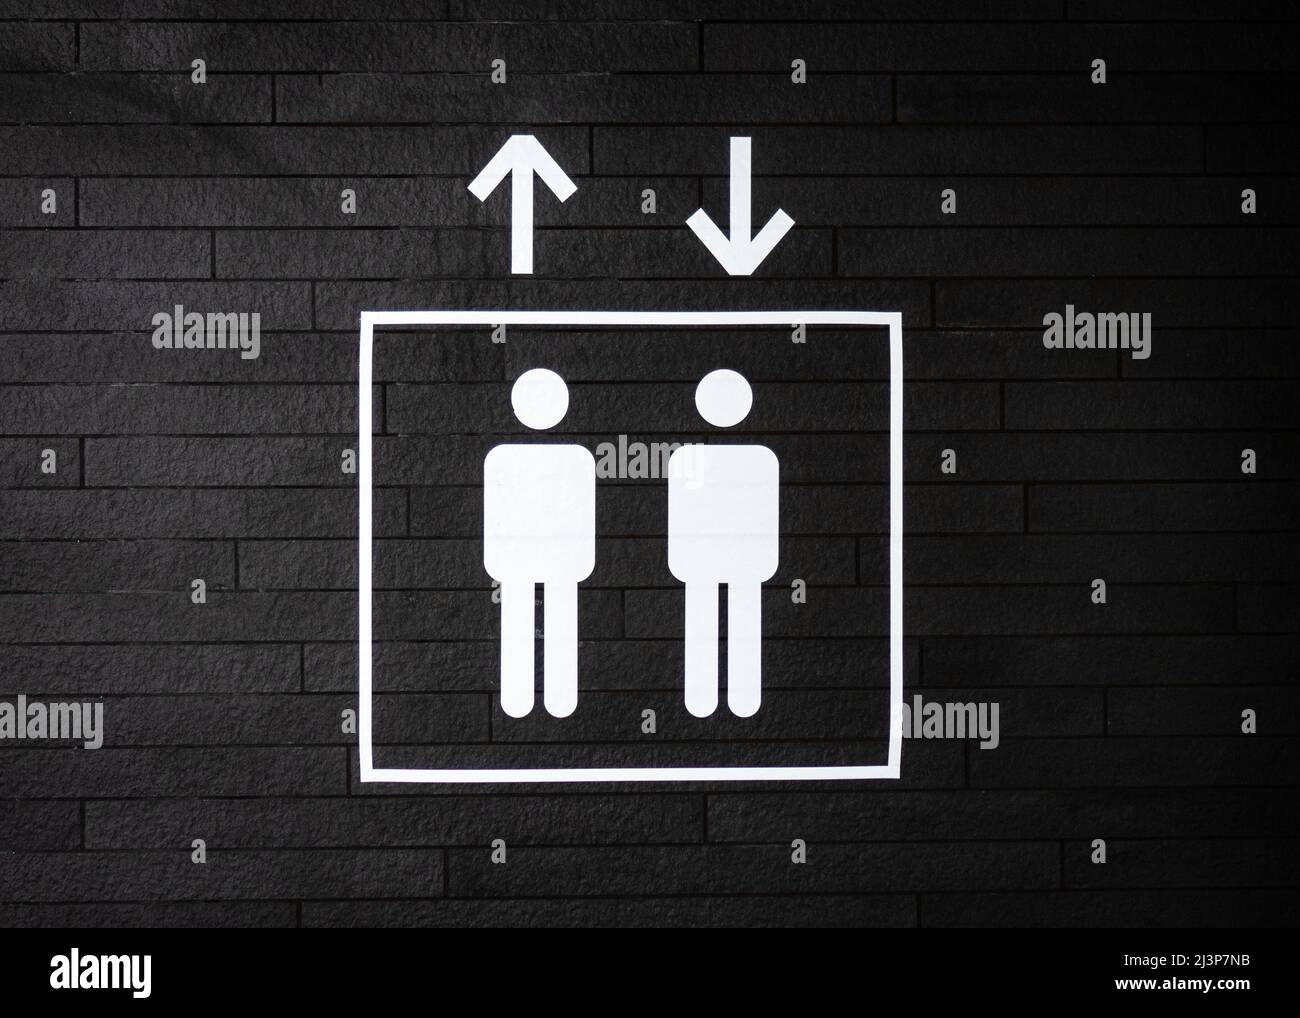 Clean lines lift symbol sign going up and down in white paint on dark black textured wall. Two symbols of men standing in elevator. Stock Photo